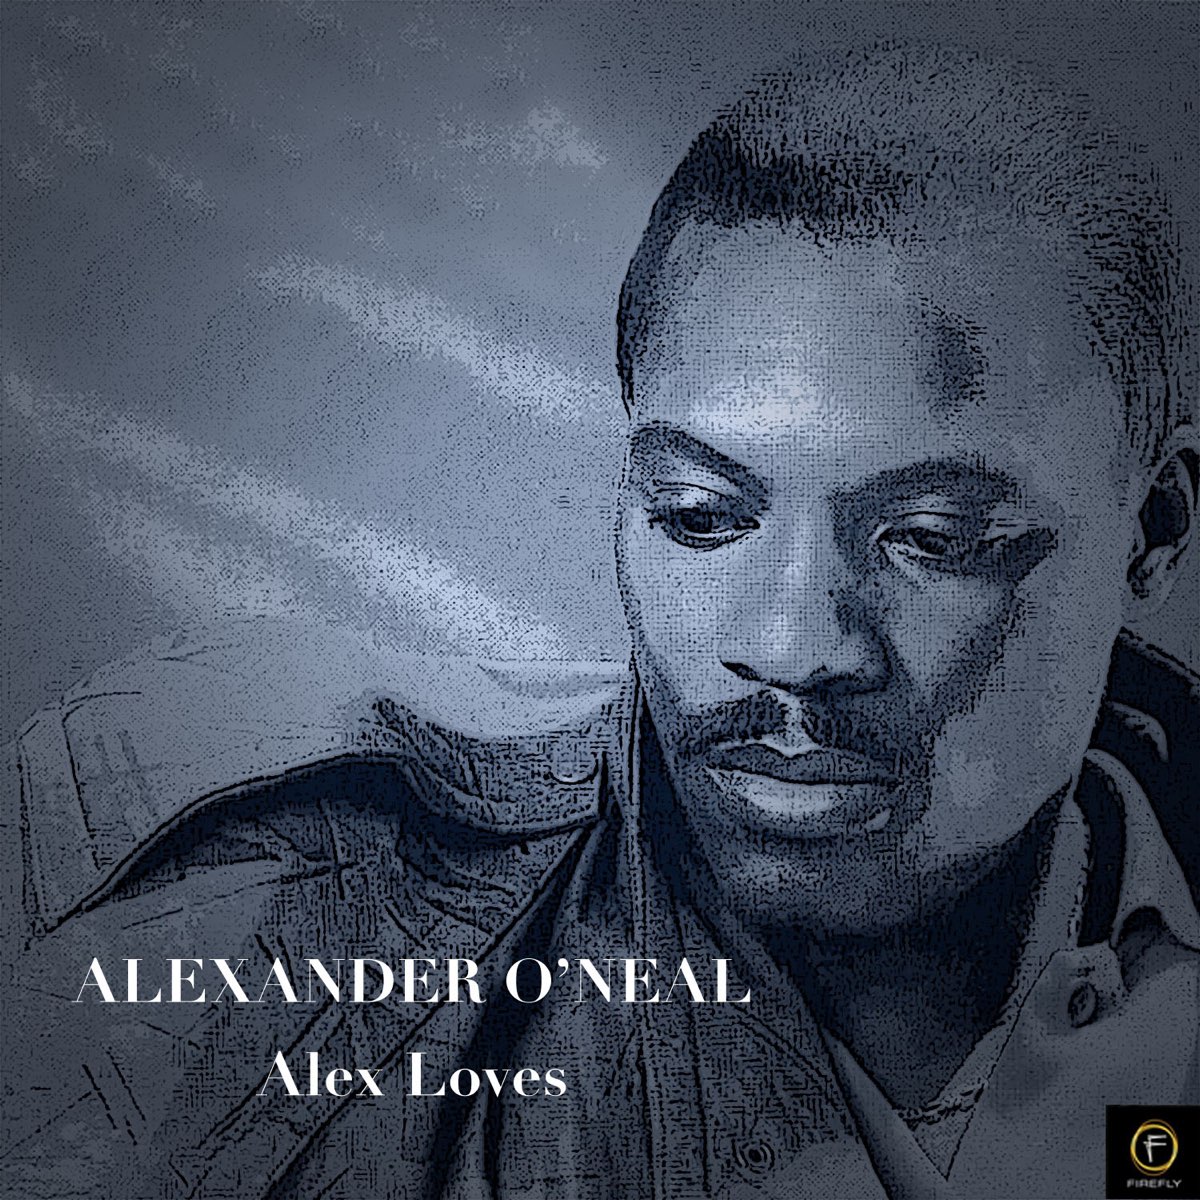 Alexander o'Neal if you were here Tonight. From Alex with Love. Алекс лове